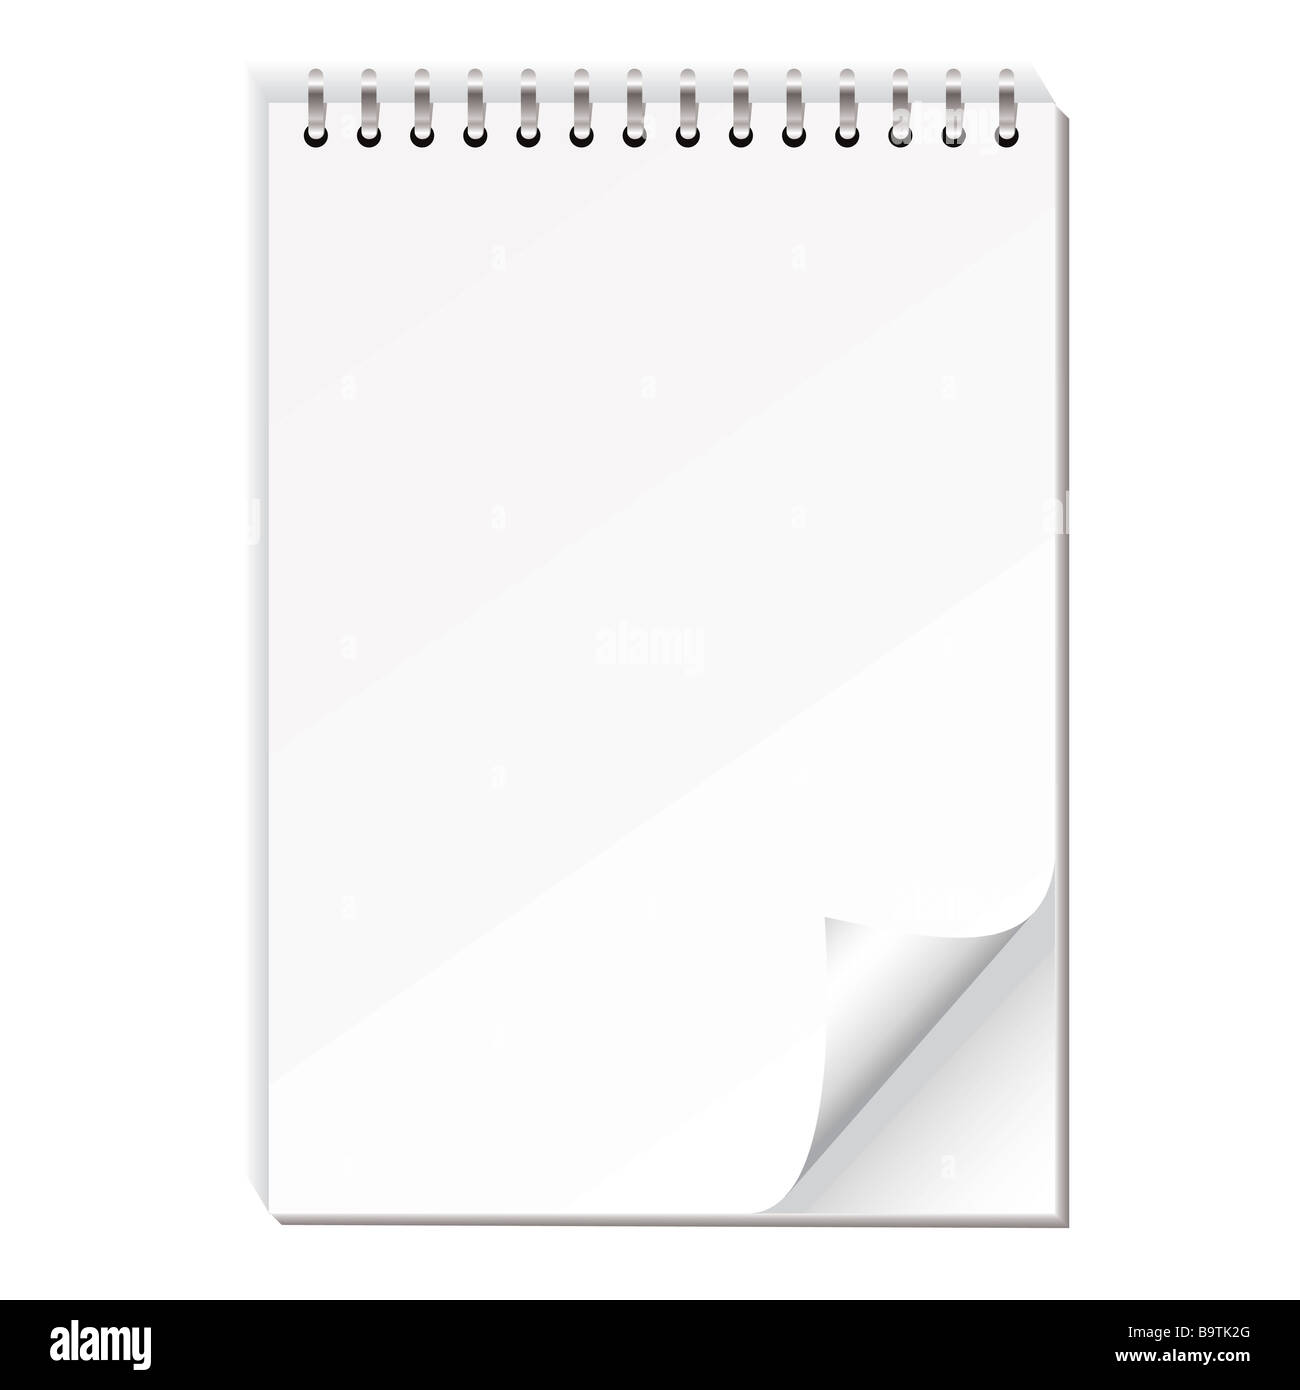 Blank White Note Pad With Ring Bind And Shadow Effect Stock Photo Alamy